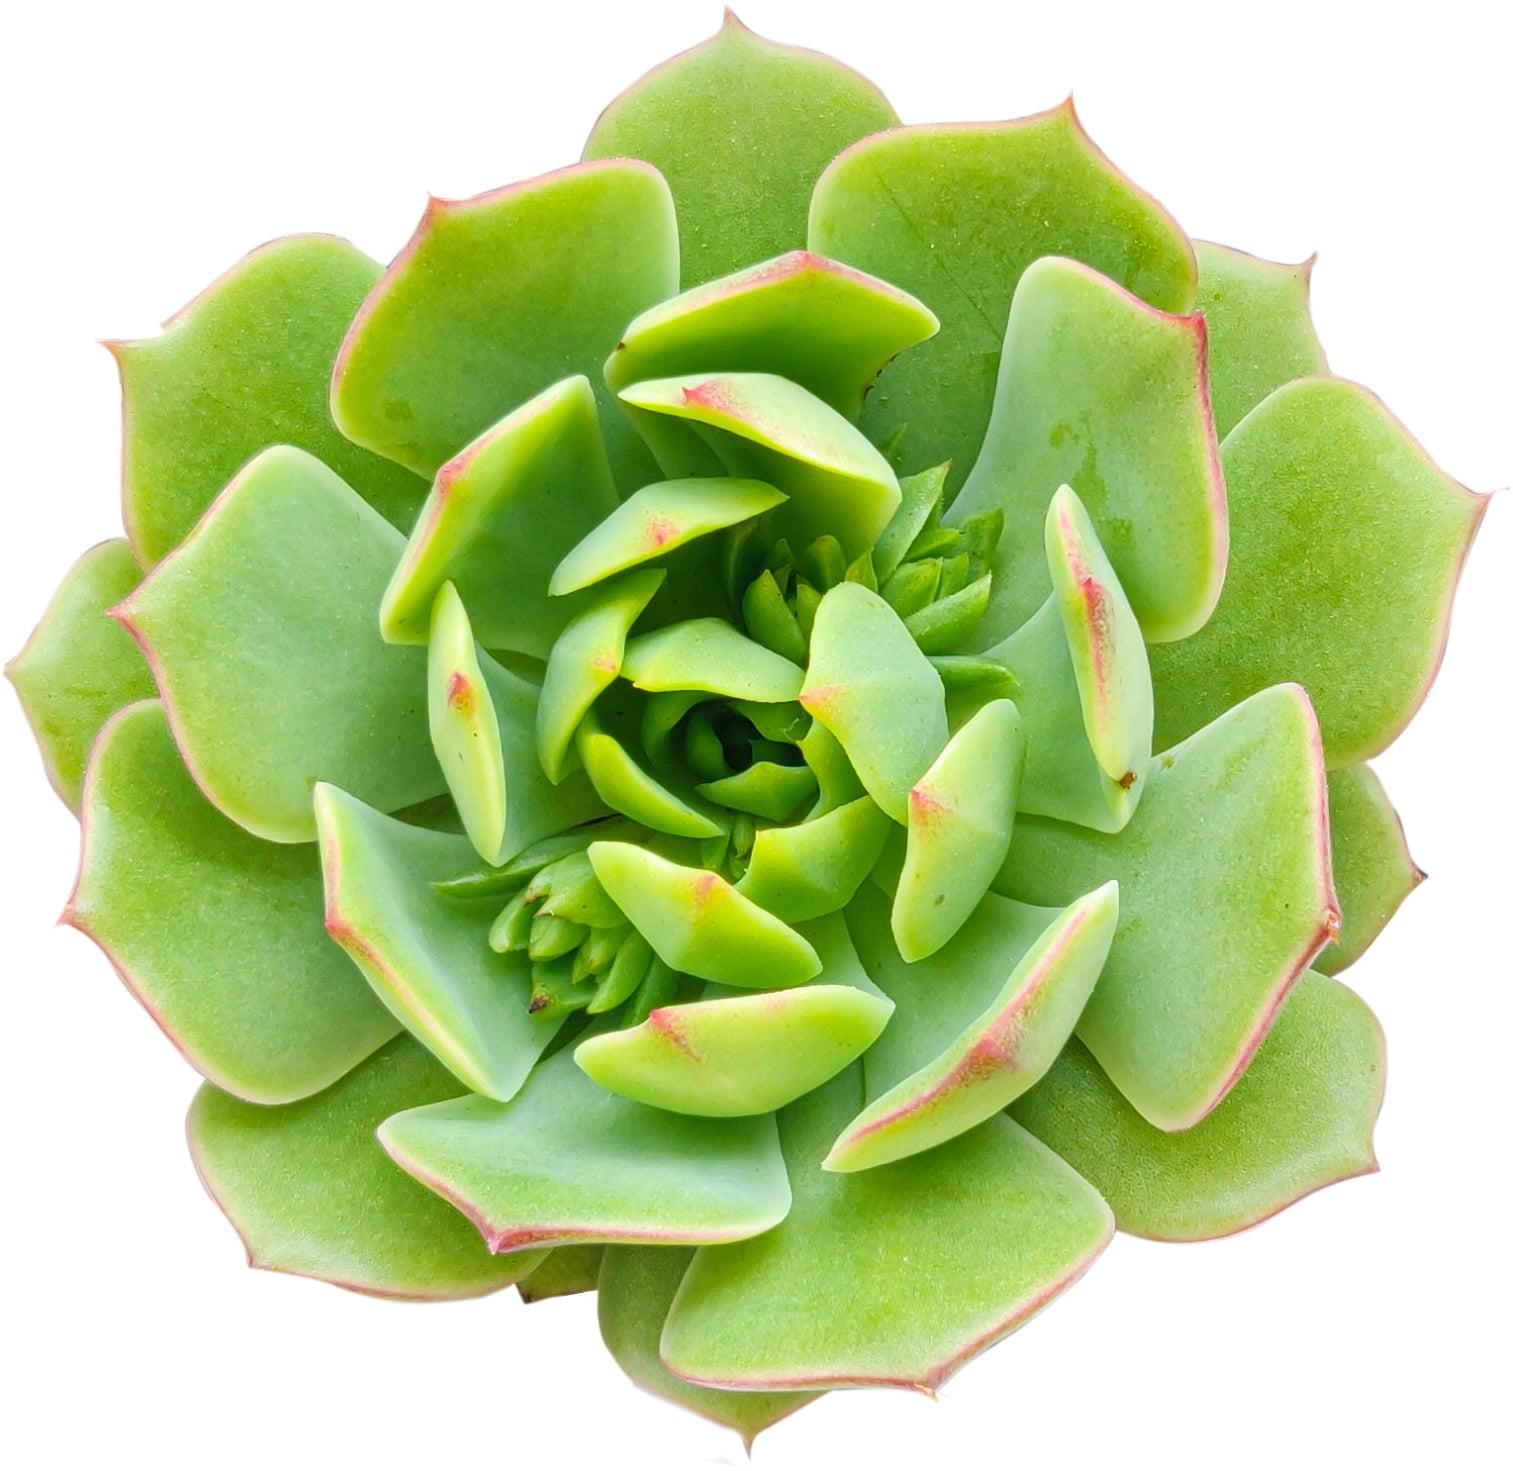 Echeveria Ramillette Succulent Plant, Mexican Hens and Chicks, Apple Green Rosettes, Buy Succulents Online, Shop Succulents in California, Succulents Home Decor, Types of Echeveria Succulents, Easter echeveria gift, Echeveria gift for thanksgiving, echeveria, echeveria succulent, echeveria types, succulent echeveria, buy succulents online, succulent shop, succulent store, echeveria plant, indoor succulents